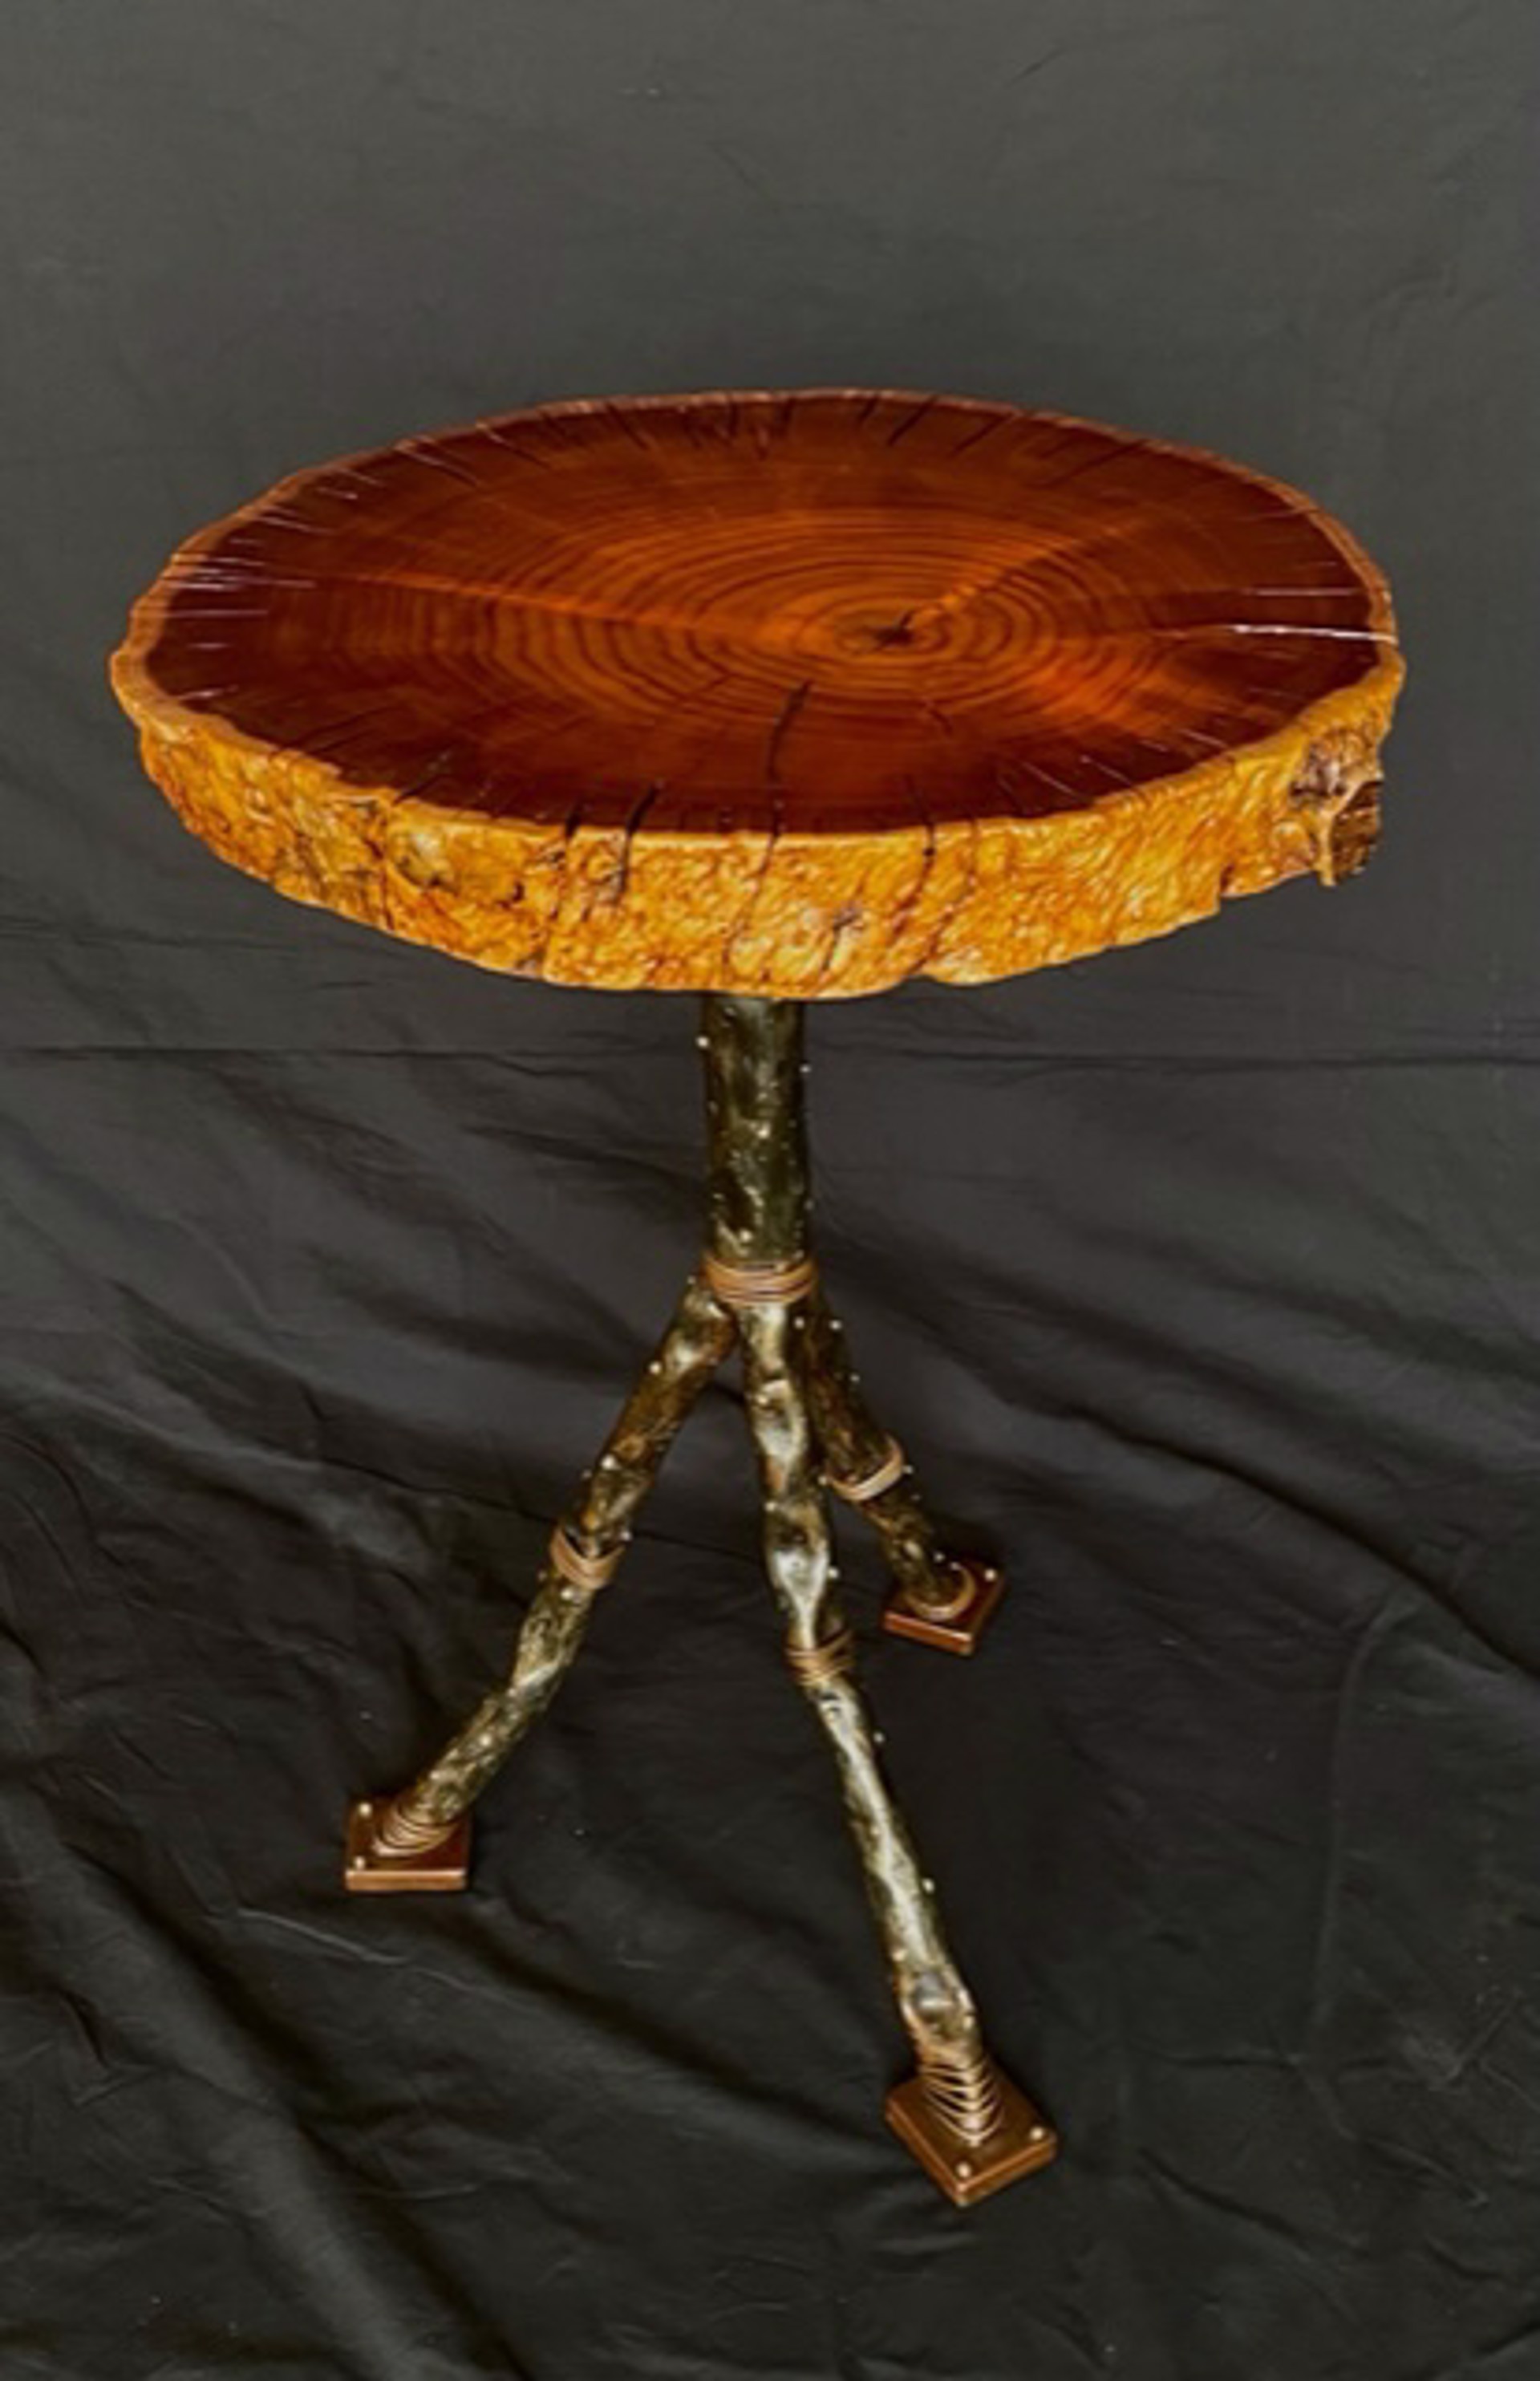 African Sumac Side Table on Crazy Tripod Base 110222C by Ron Gill